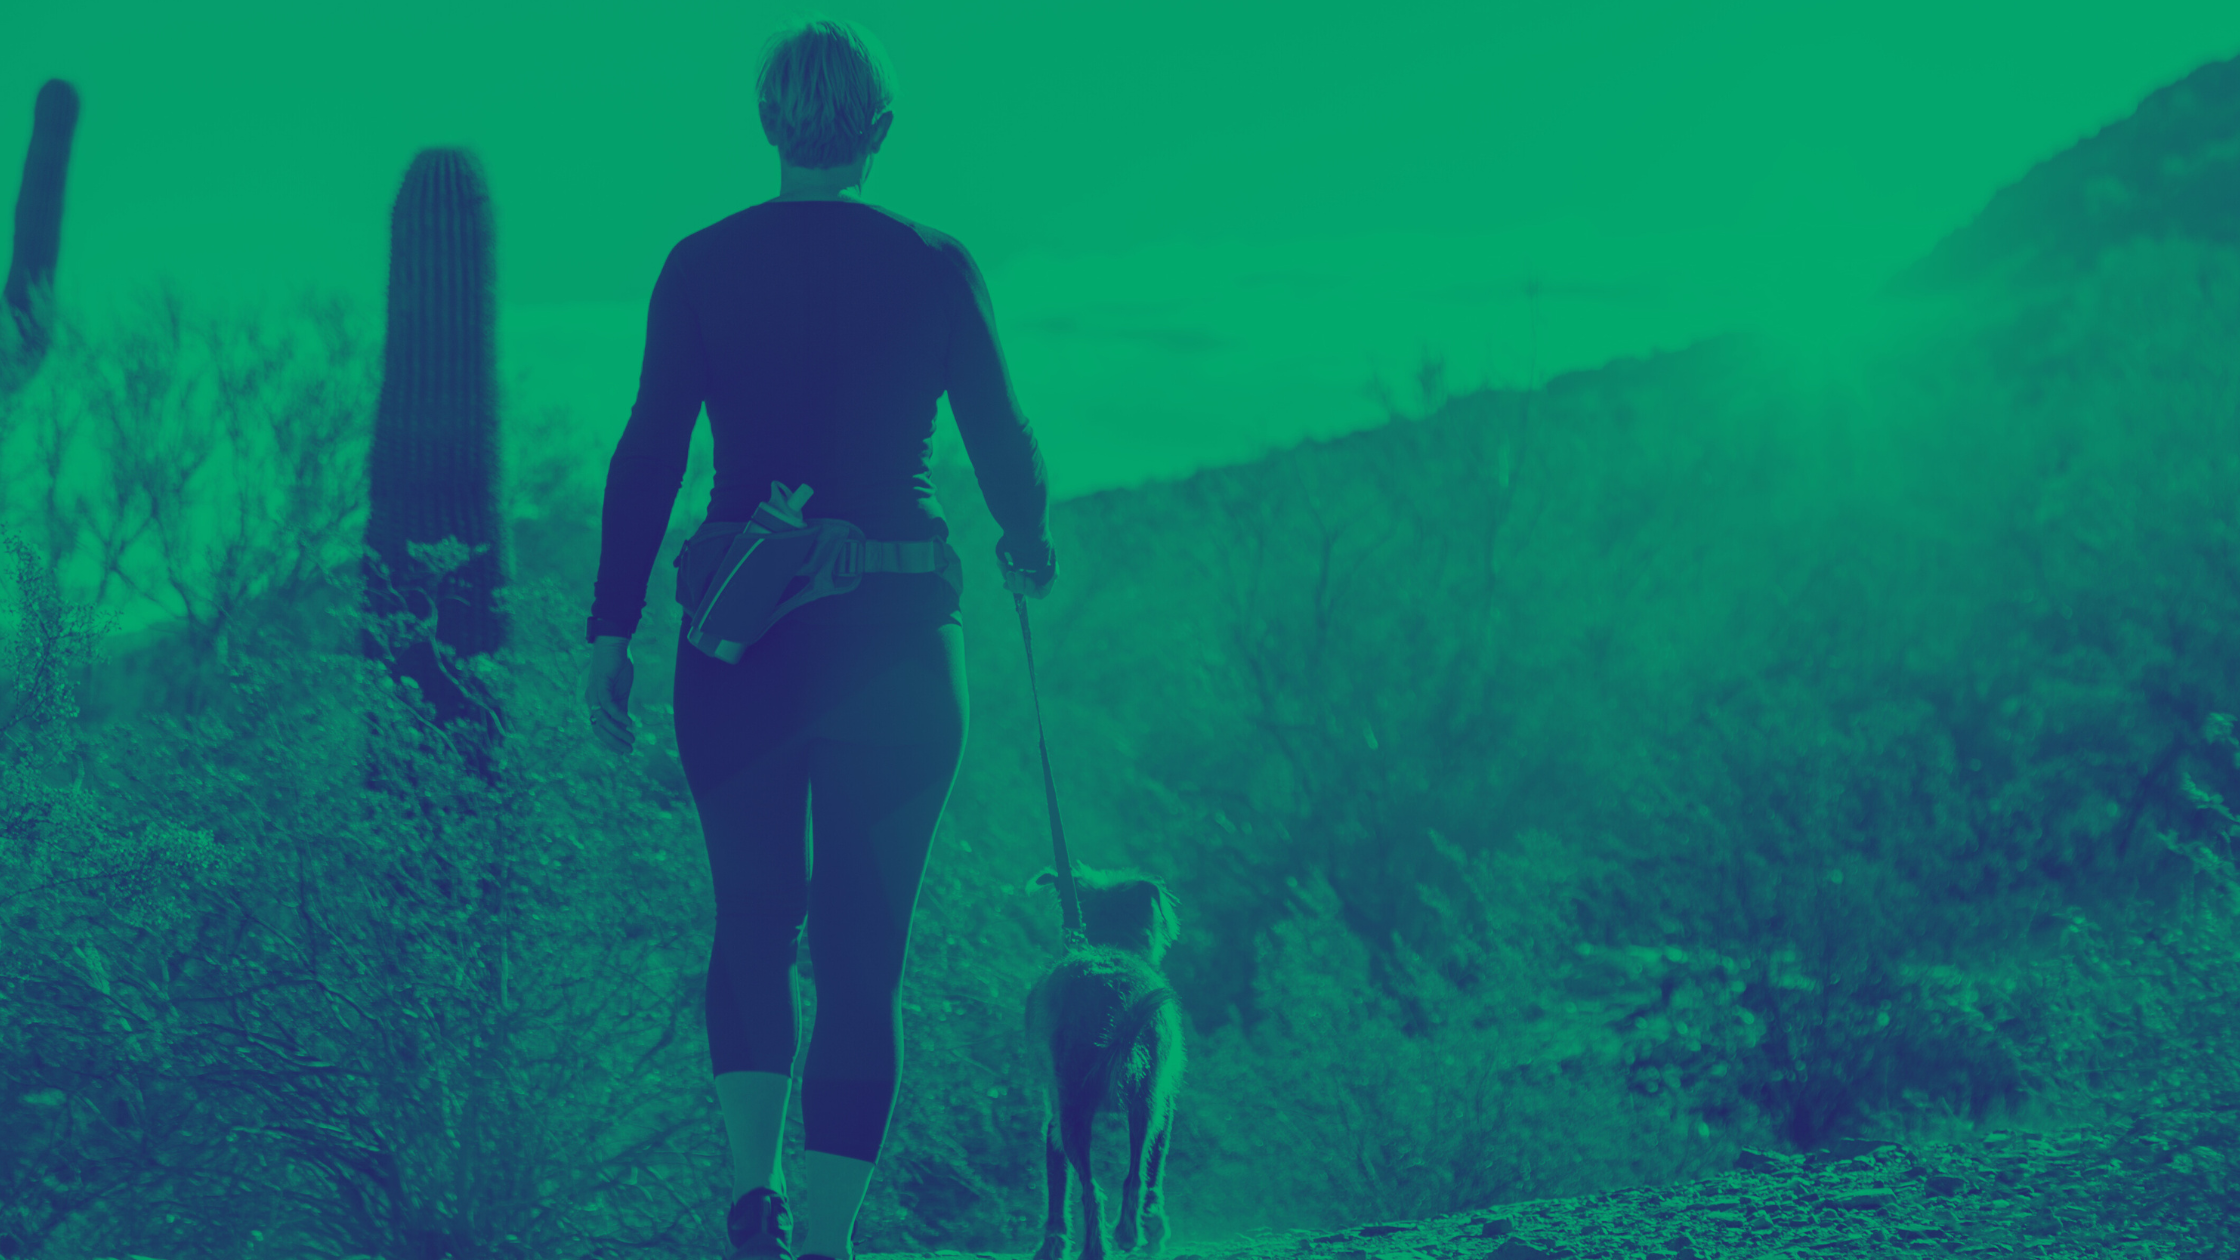 Duotone image of hiker walking with dog on a trail in Arizona